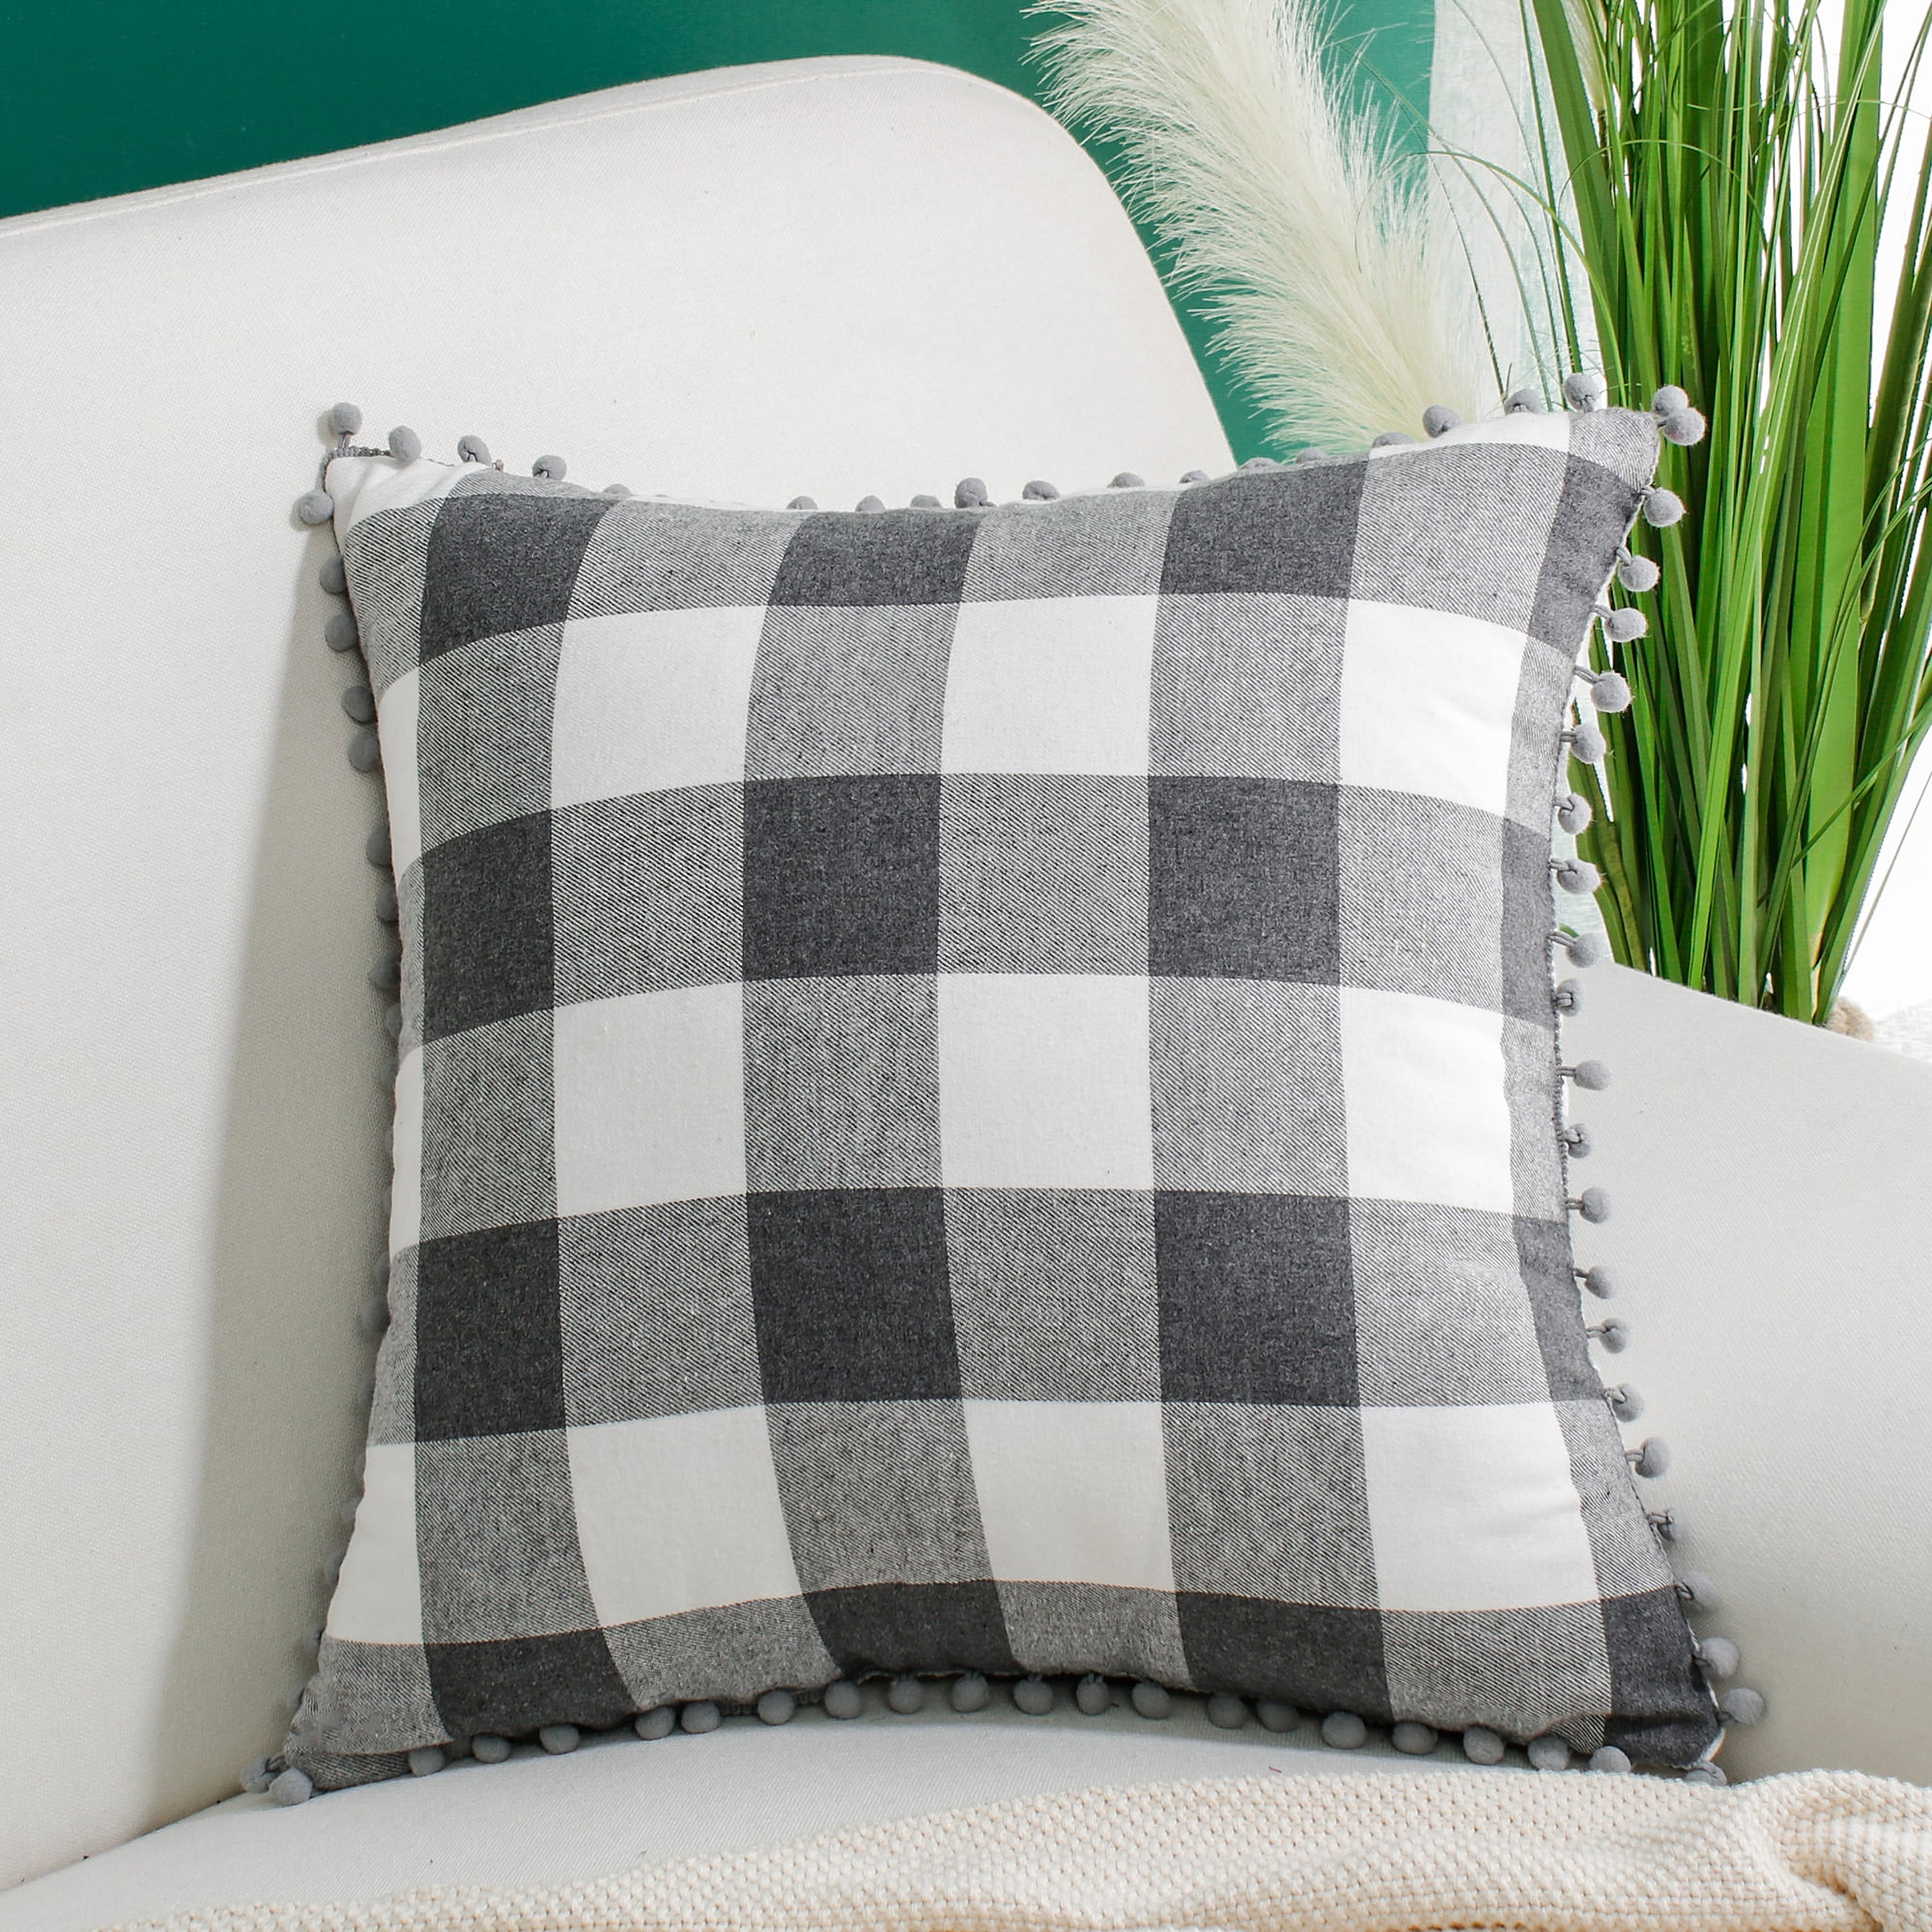 OVERSTOCK BLOWOUT! Pack of 5 Patio Pillows w/ Zipper ~ Navy & Khaki Houndstooth 